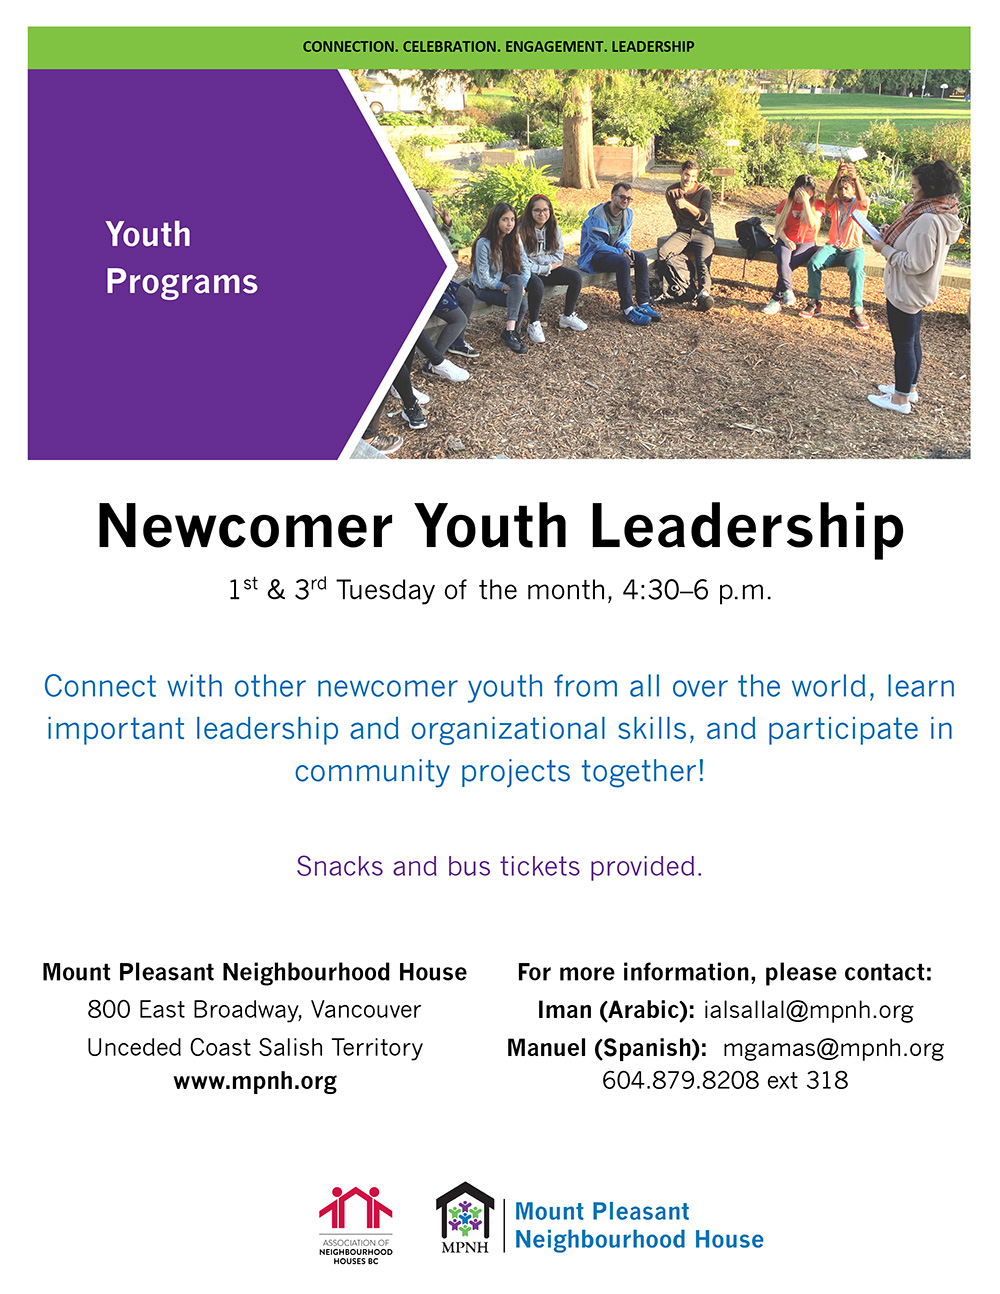 The poster for the Newcomer Youth Leadership Program showing a group of youth at a campsite